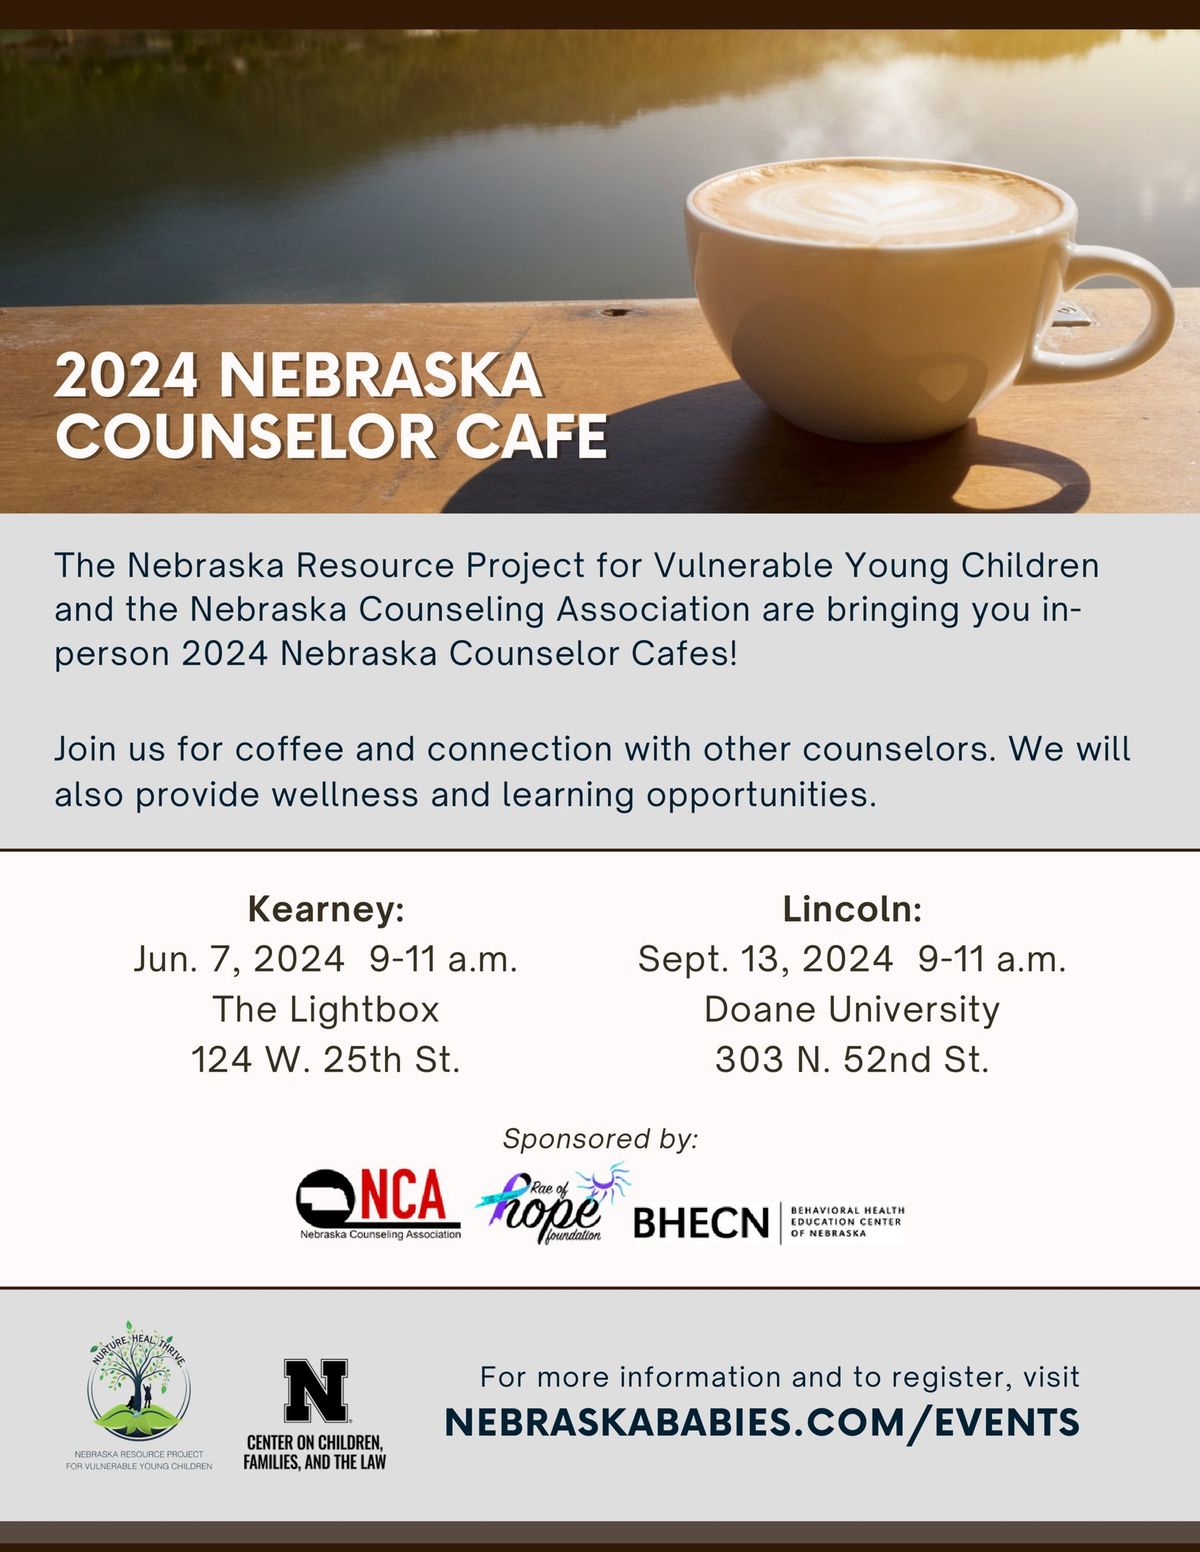 2024 Counselor Cafe series-Lincoln event